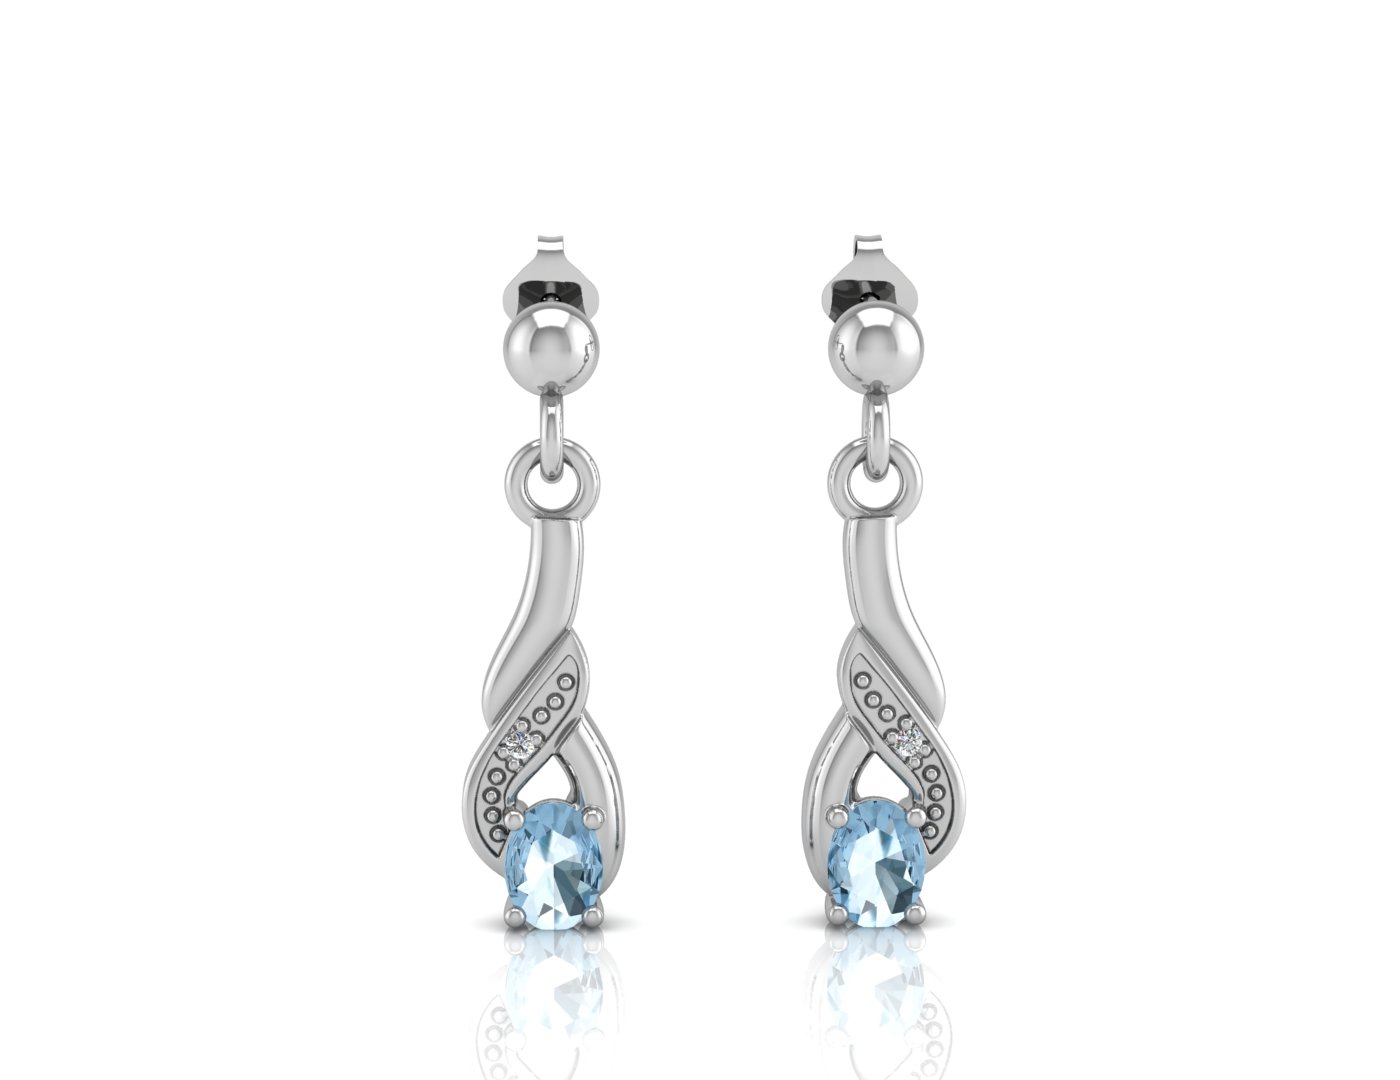 9ct White Gold Diamond And Blue Topaz Earring 0.01 Carats - Image 3 of 3